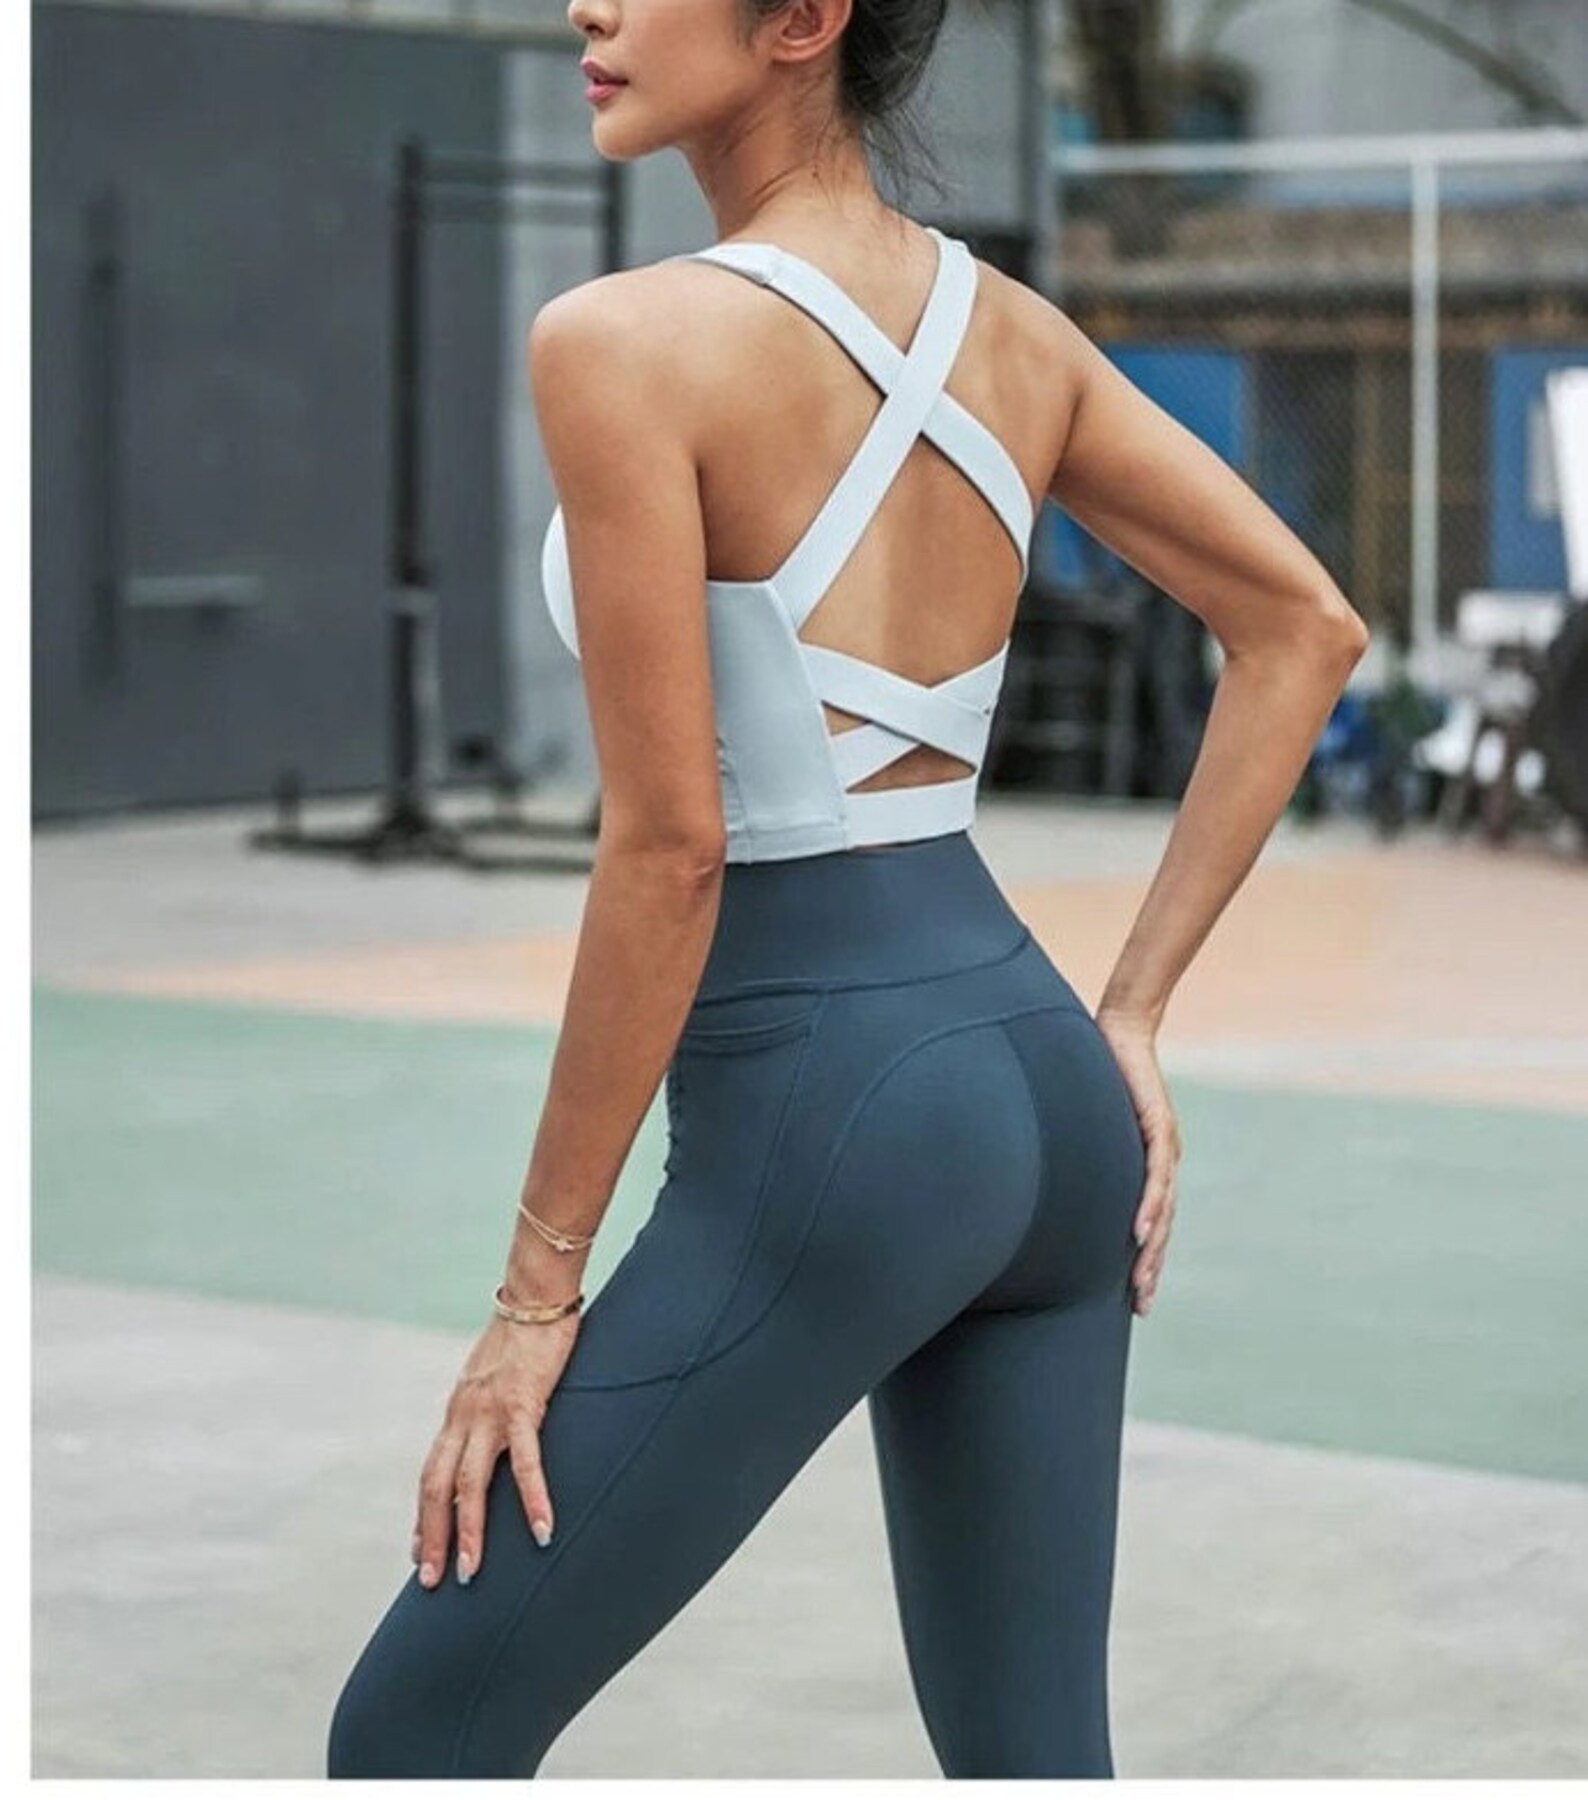 10 Aesthetic Workout Outfits That'll Make You Look Like a Fitness Goddess